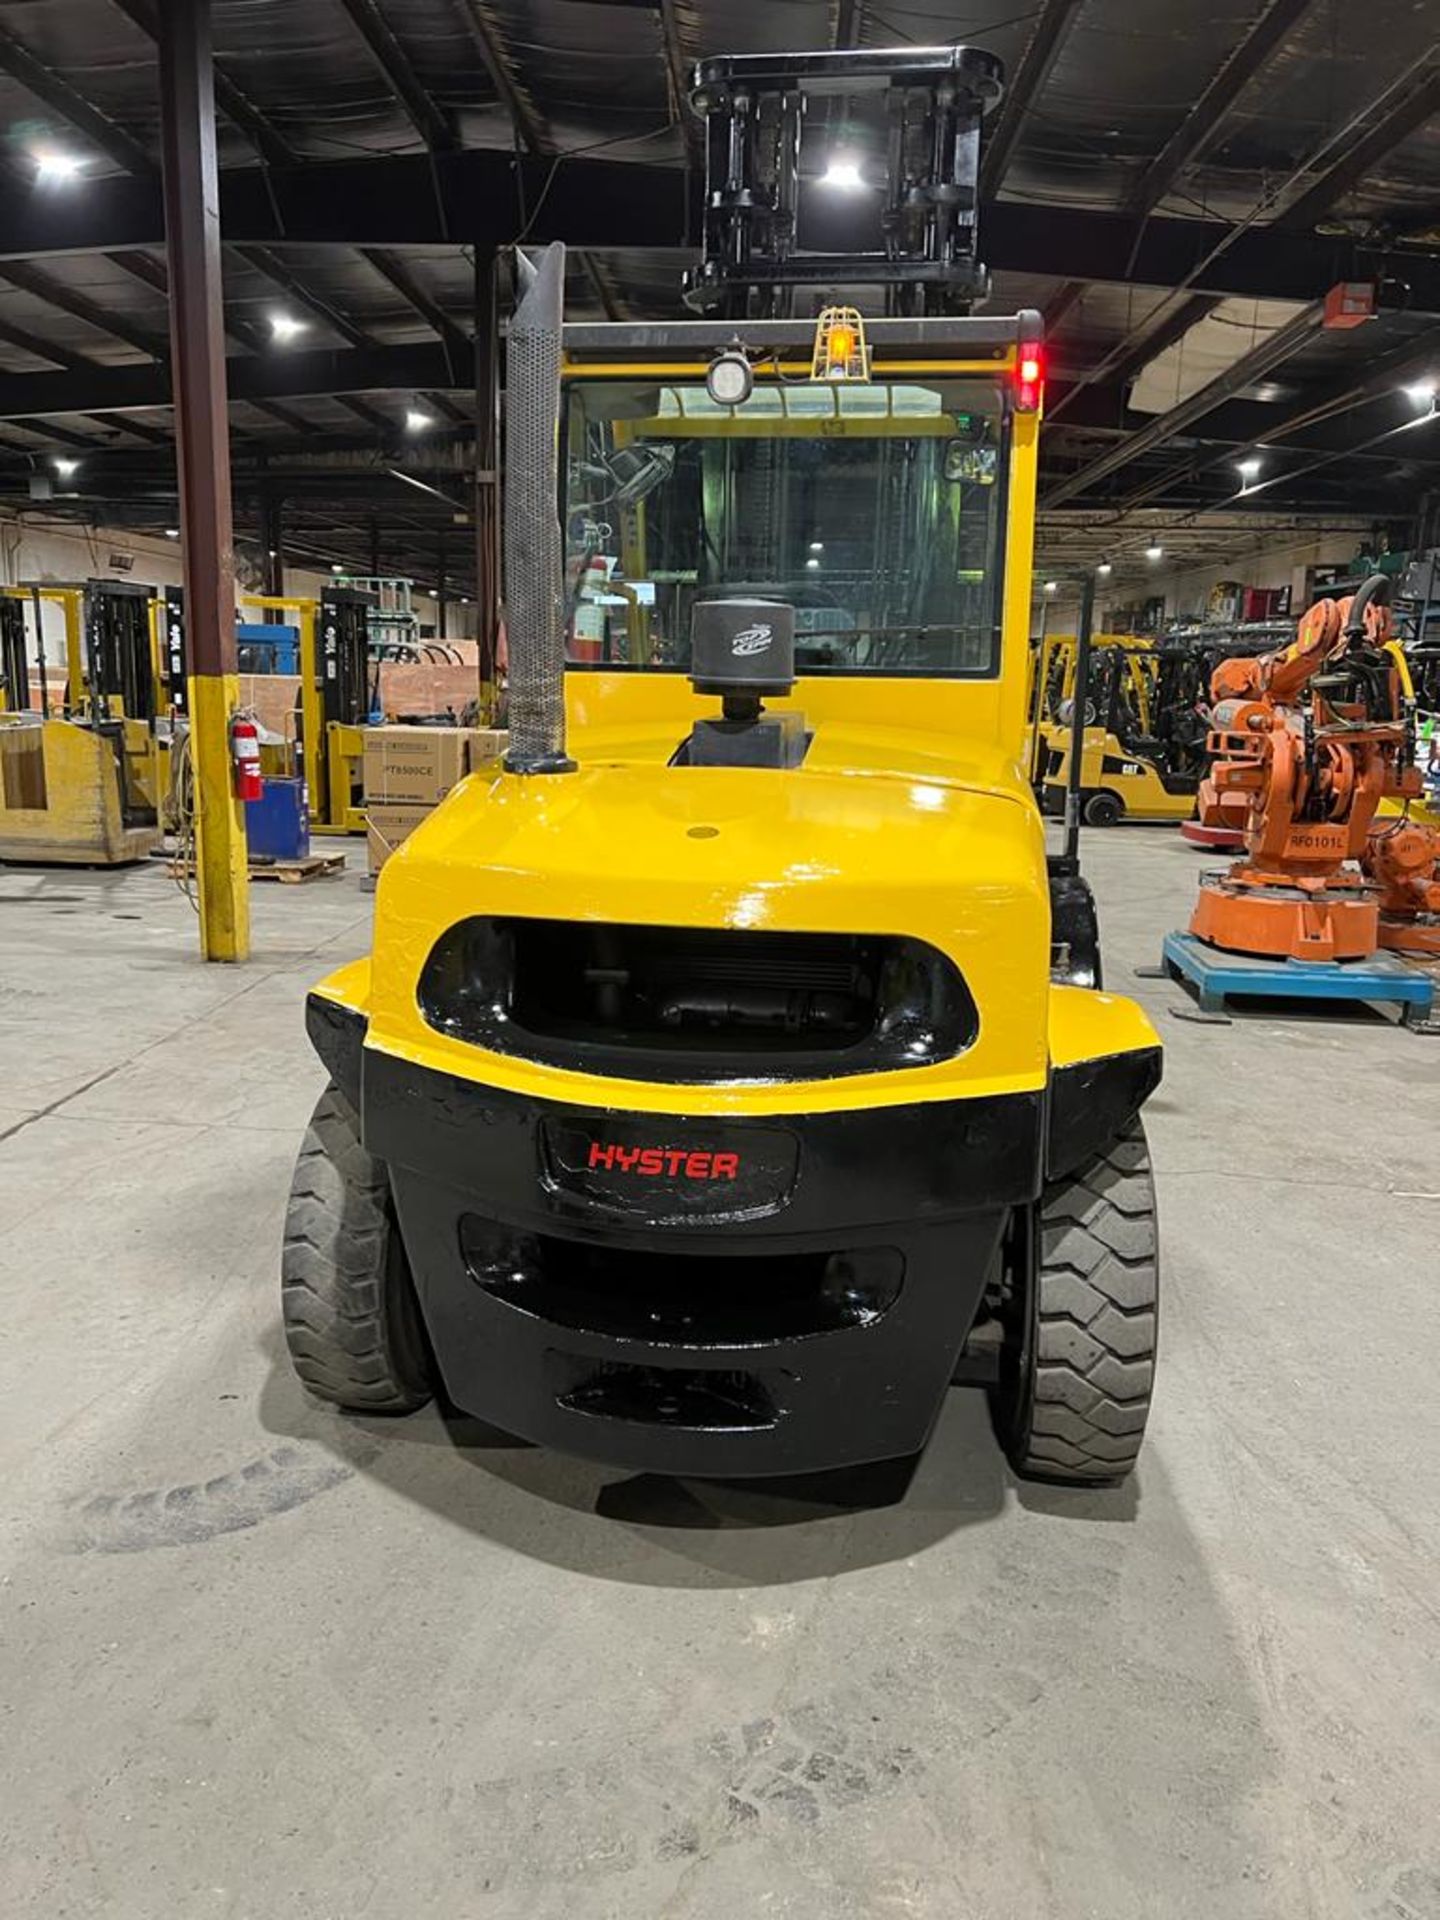 NICE 2017 Hyster model 155 - 15,500lbs Capacity OUTDOOR Forklift Diesel with CAB sideshift - Image 6 of 8